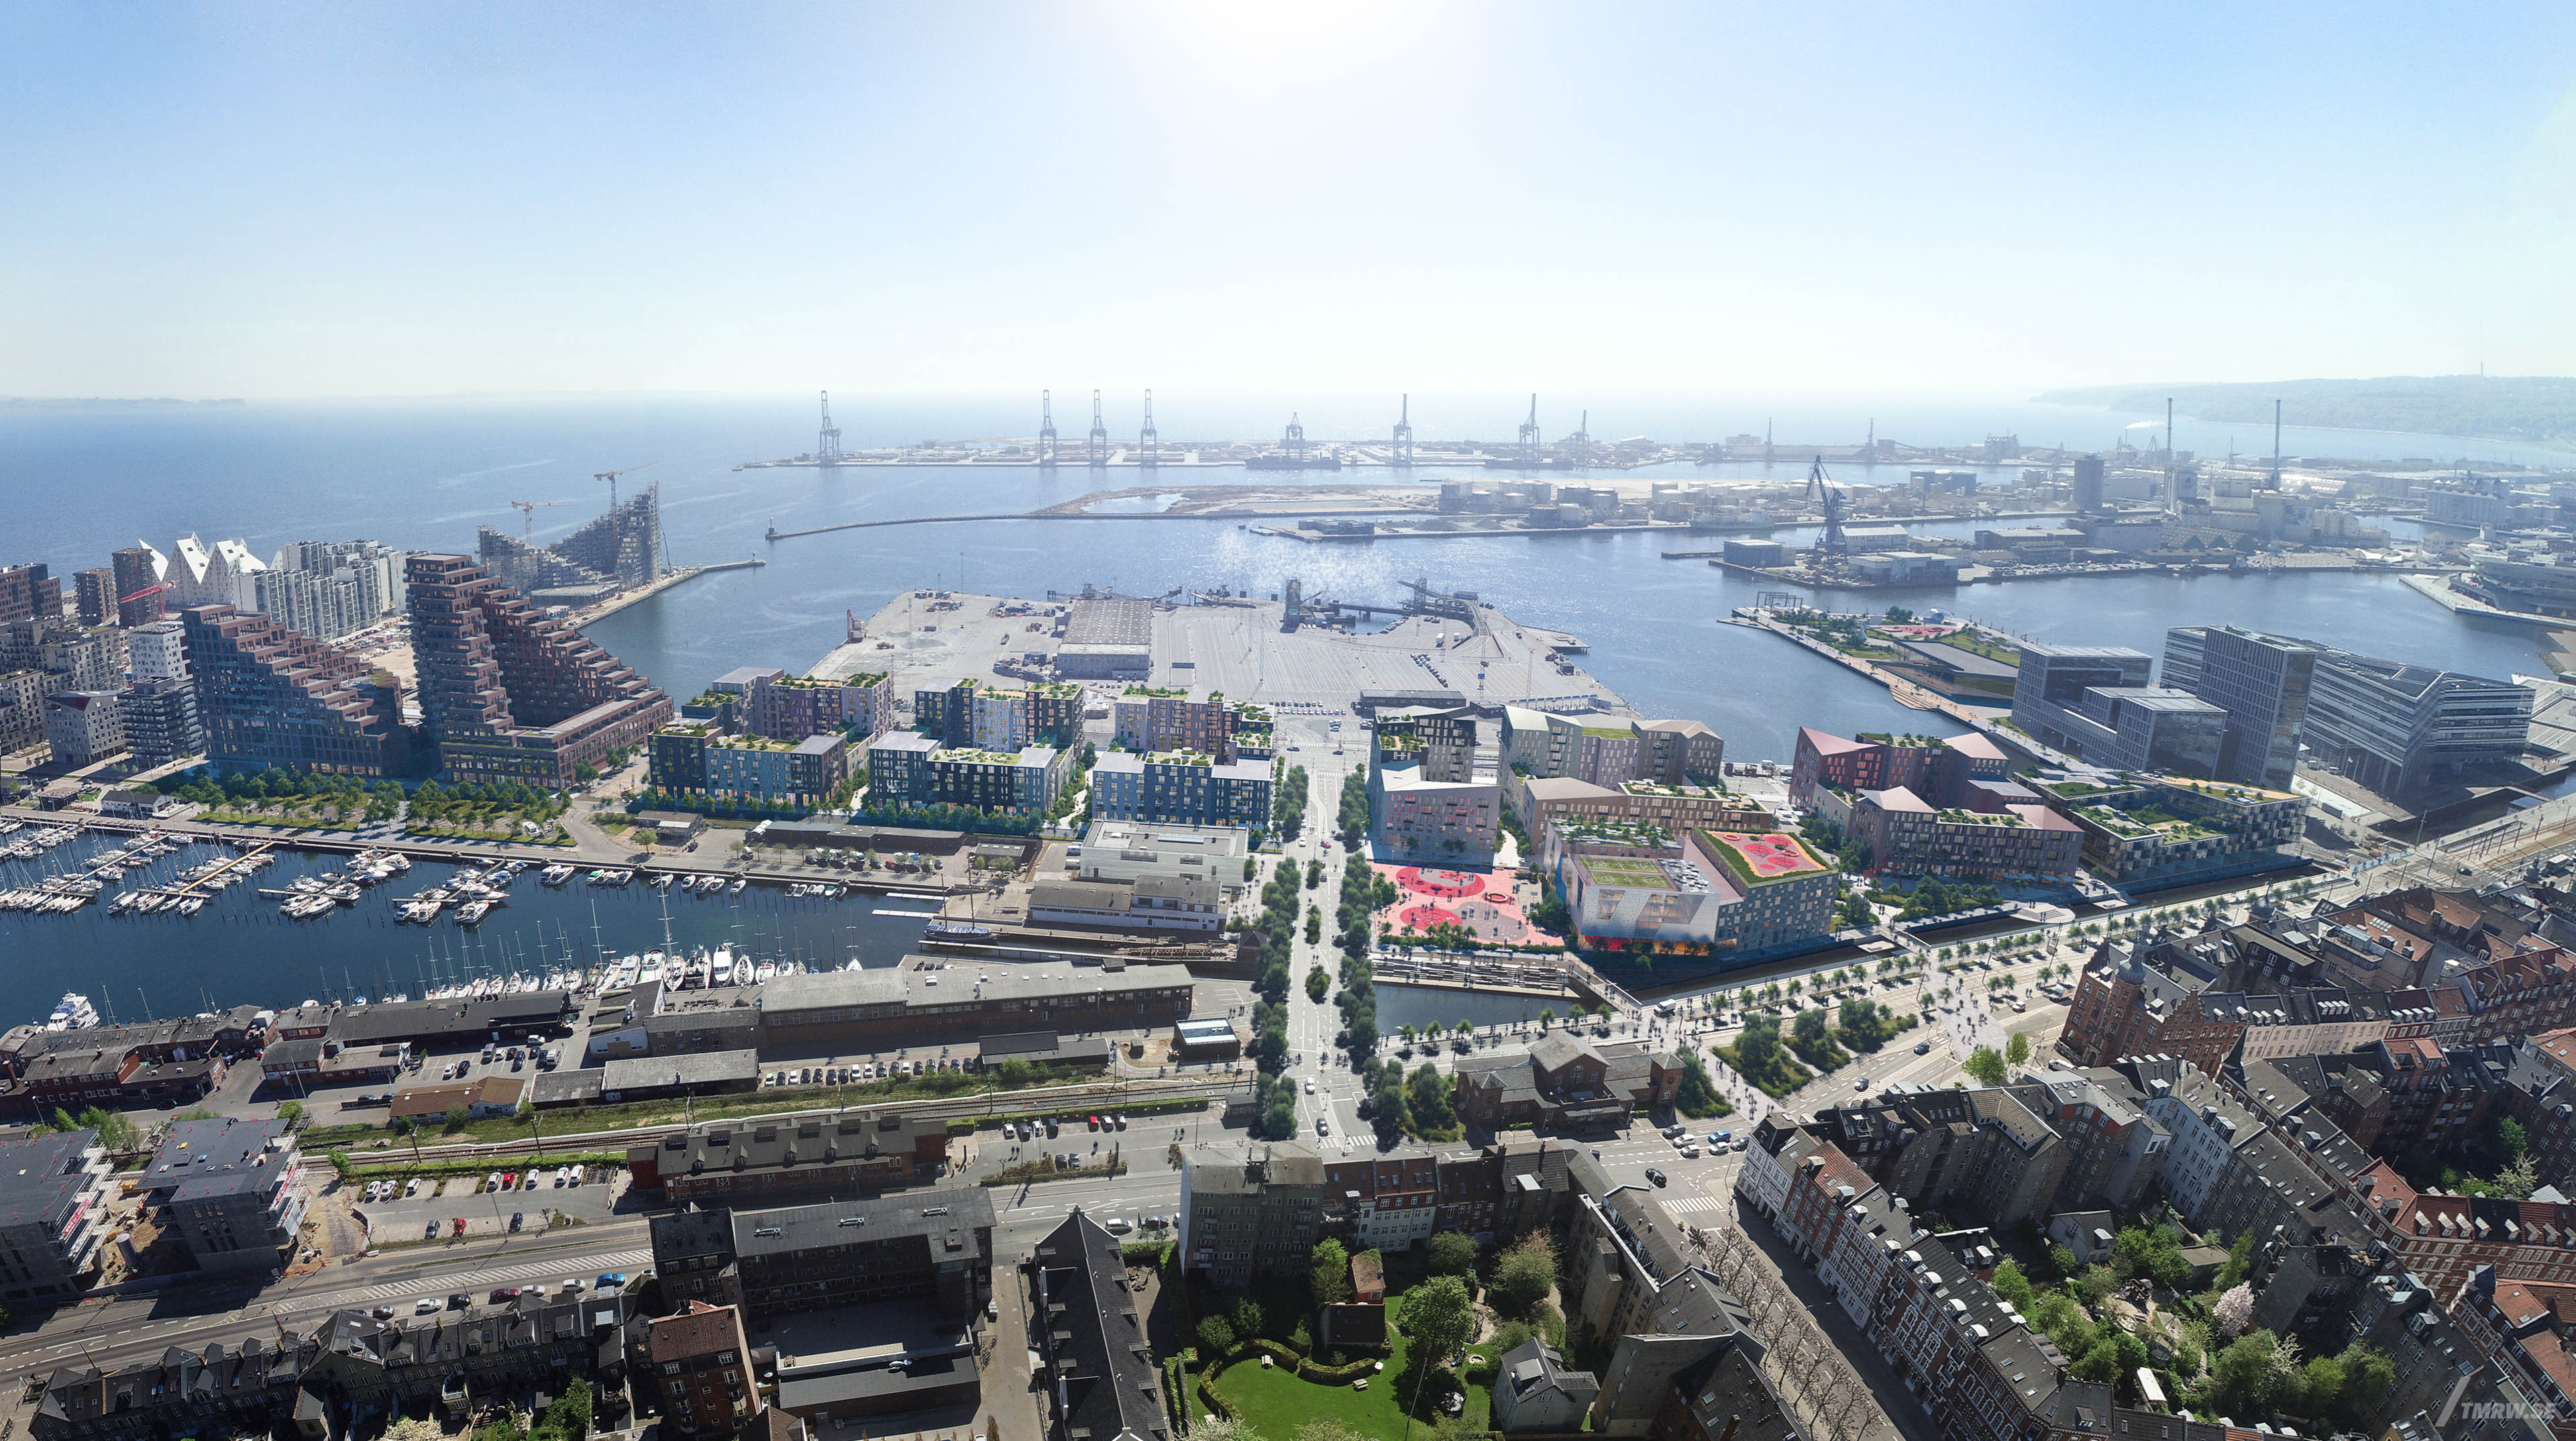 Architectural visualization of Aarhus for Gehl, arial harbor in daylight